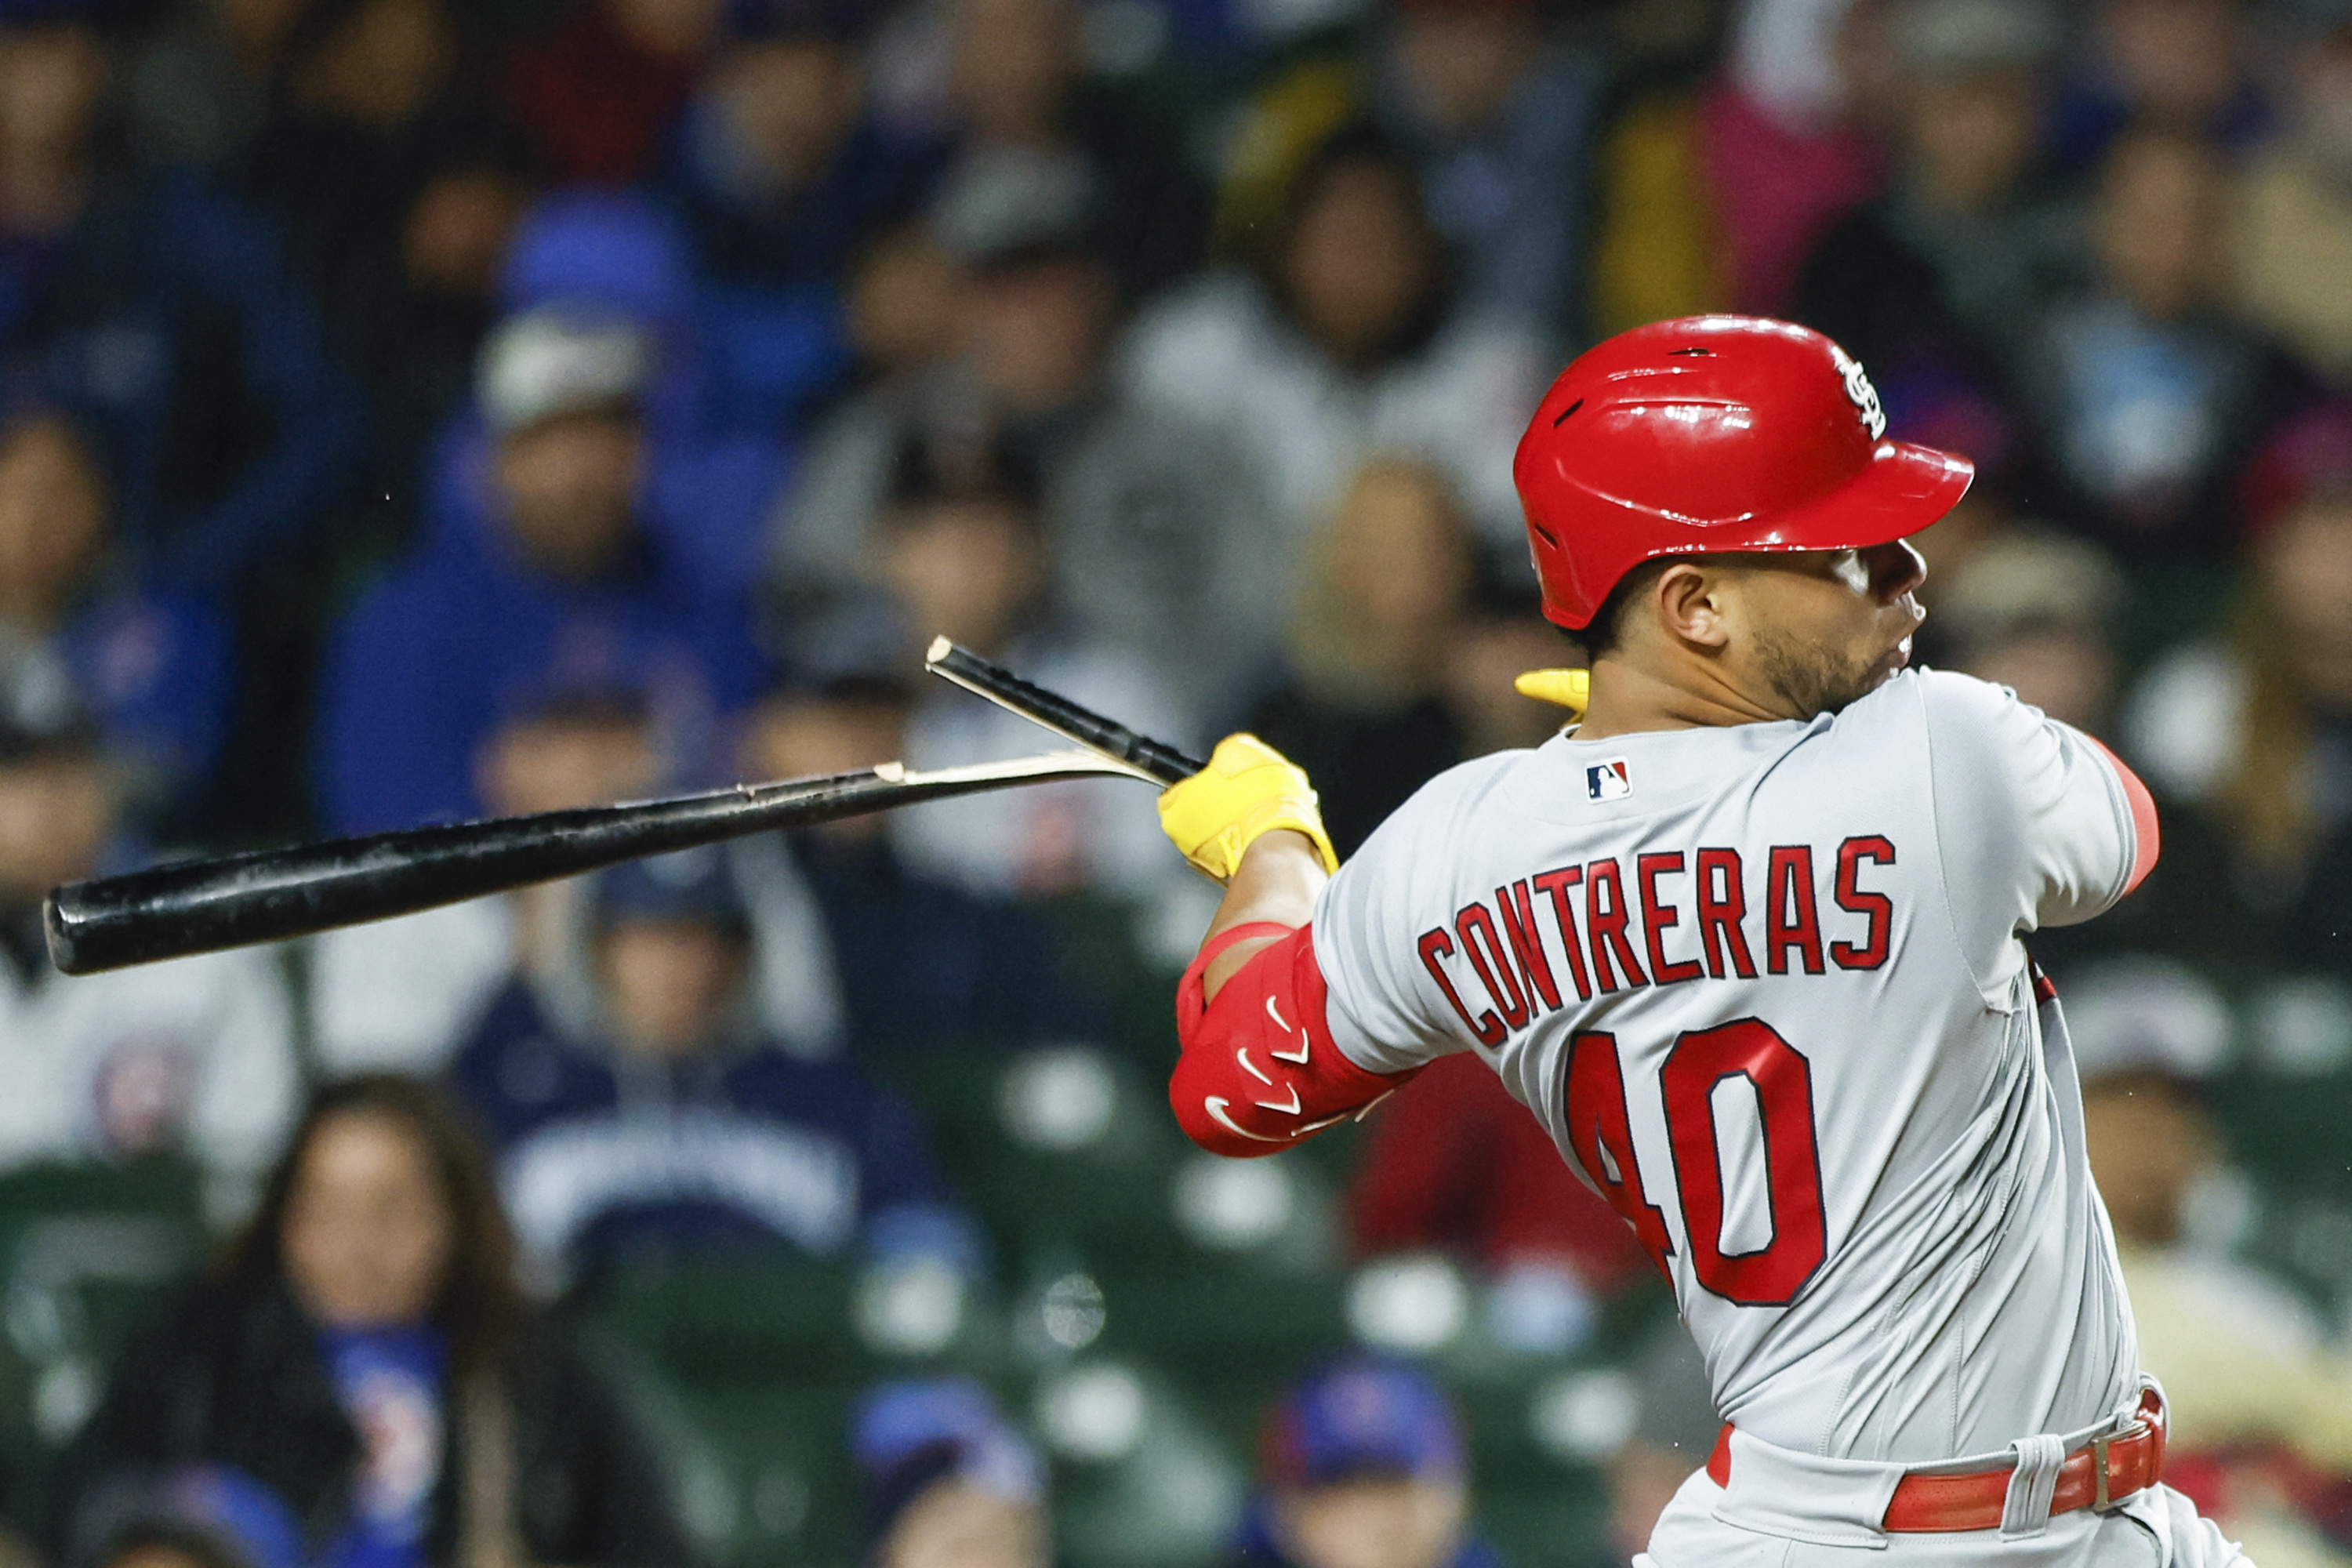 Contreras leads Cardinals past Cubs 3-1 in return to Wrigley – NBC